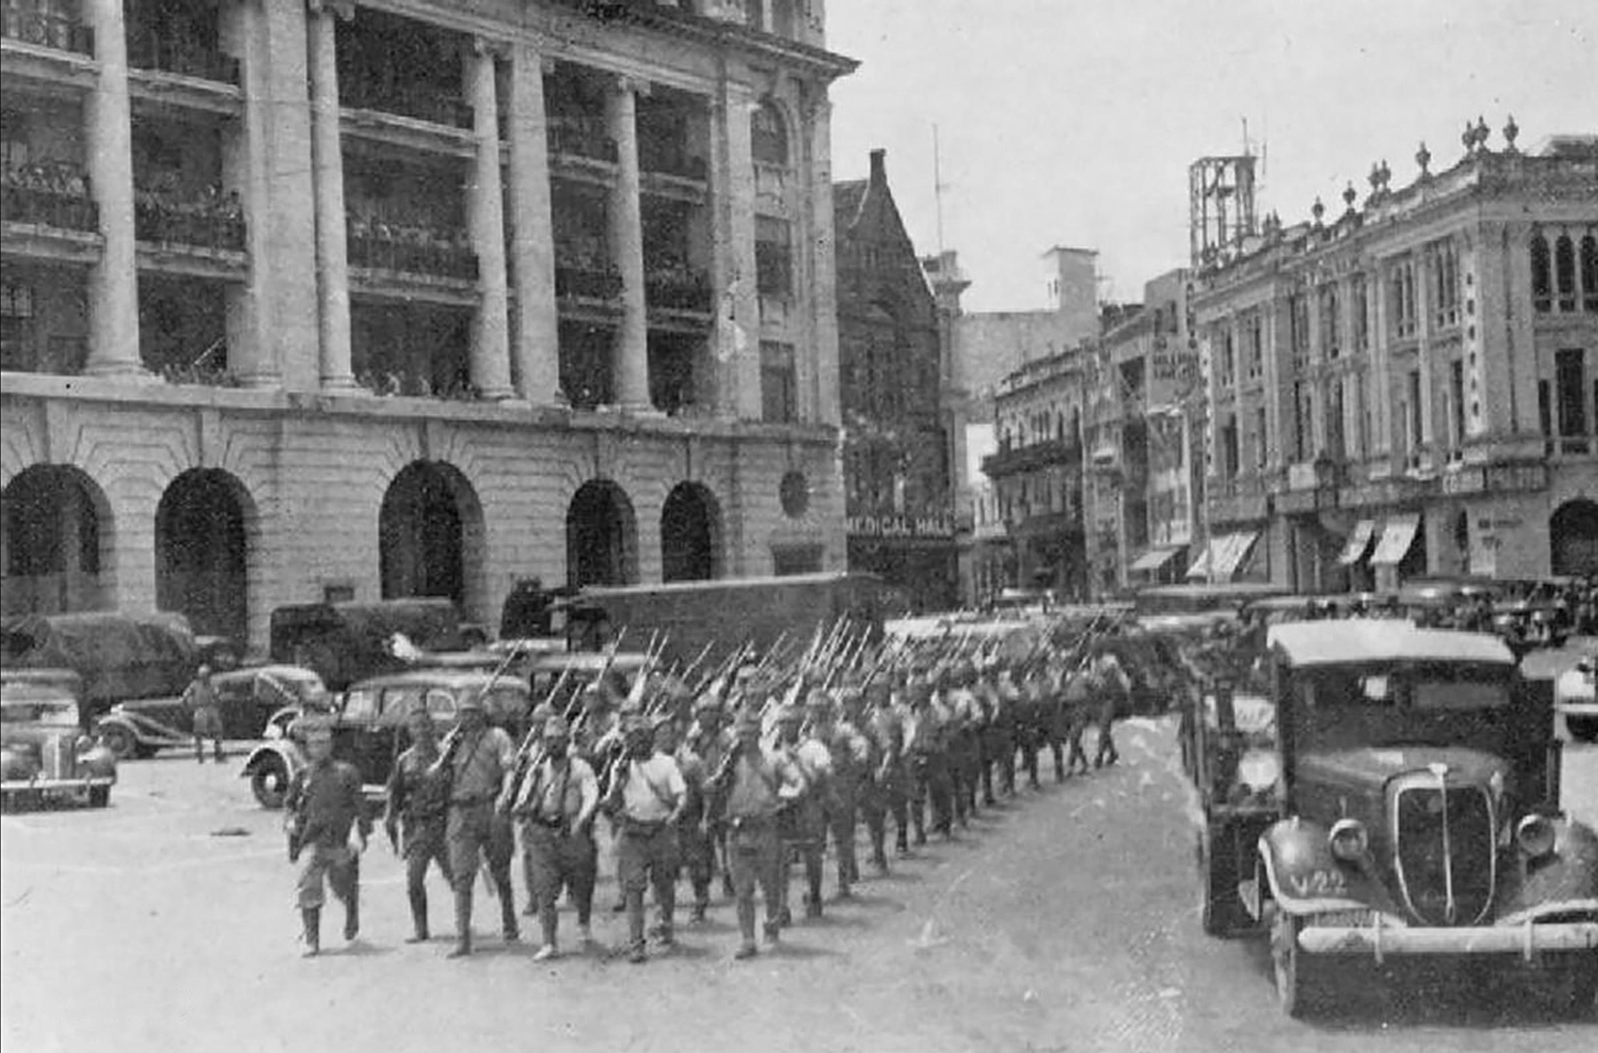 Japanese troops parading in Singapore after the fall of the city. [Source: Wikimedia Commons, PD]